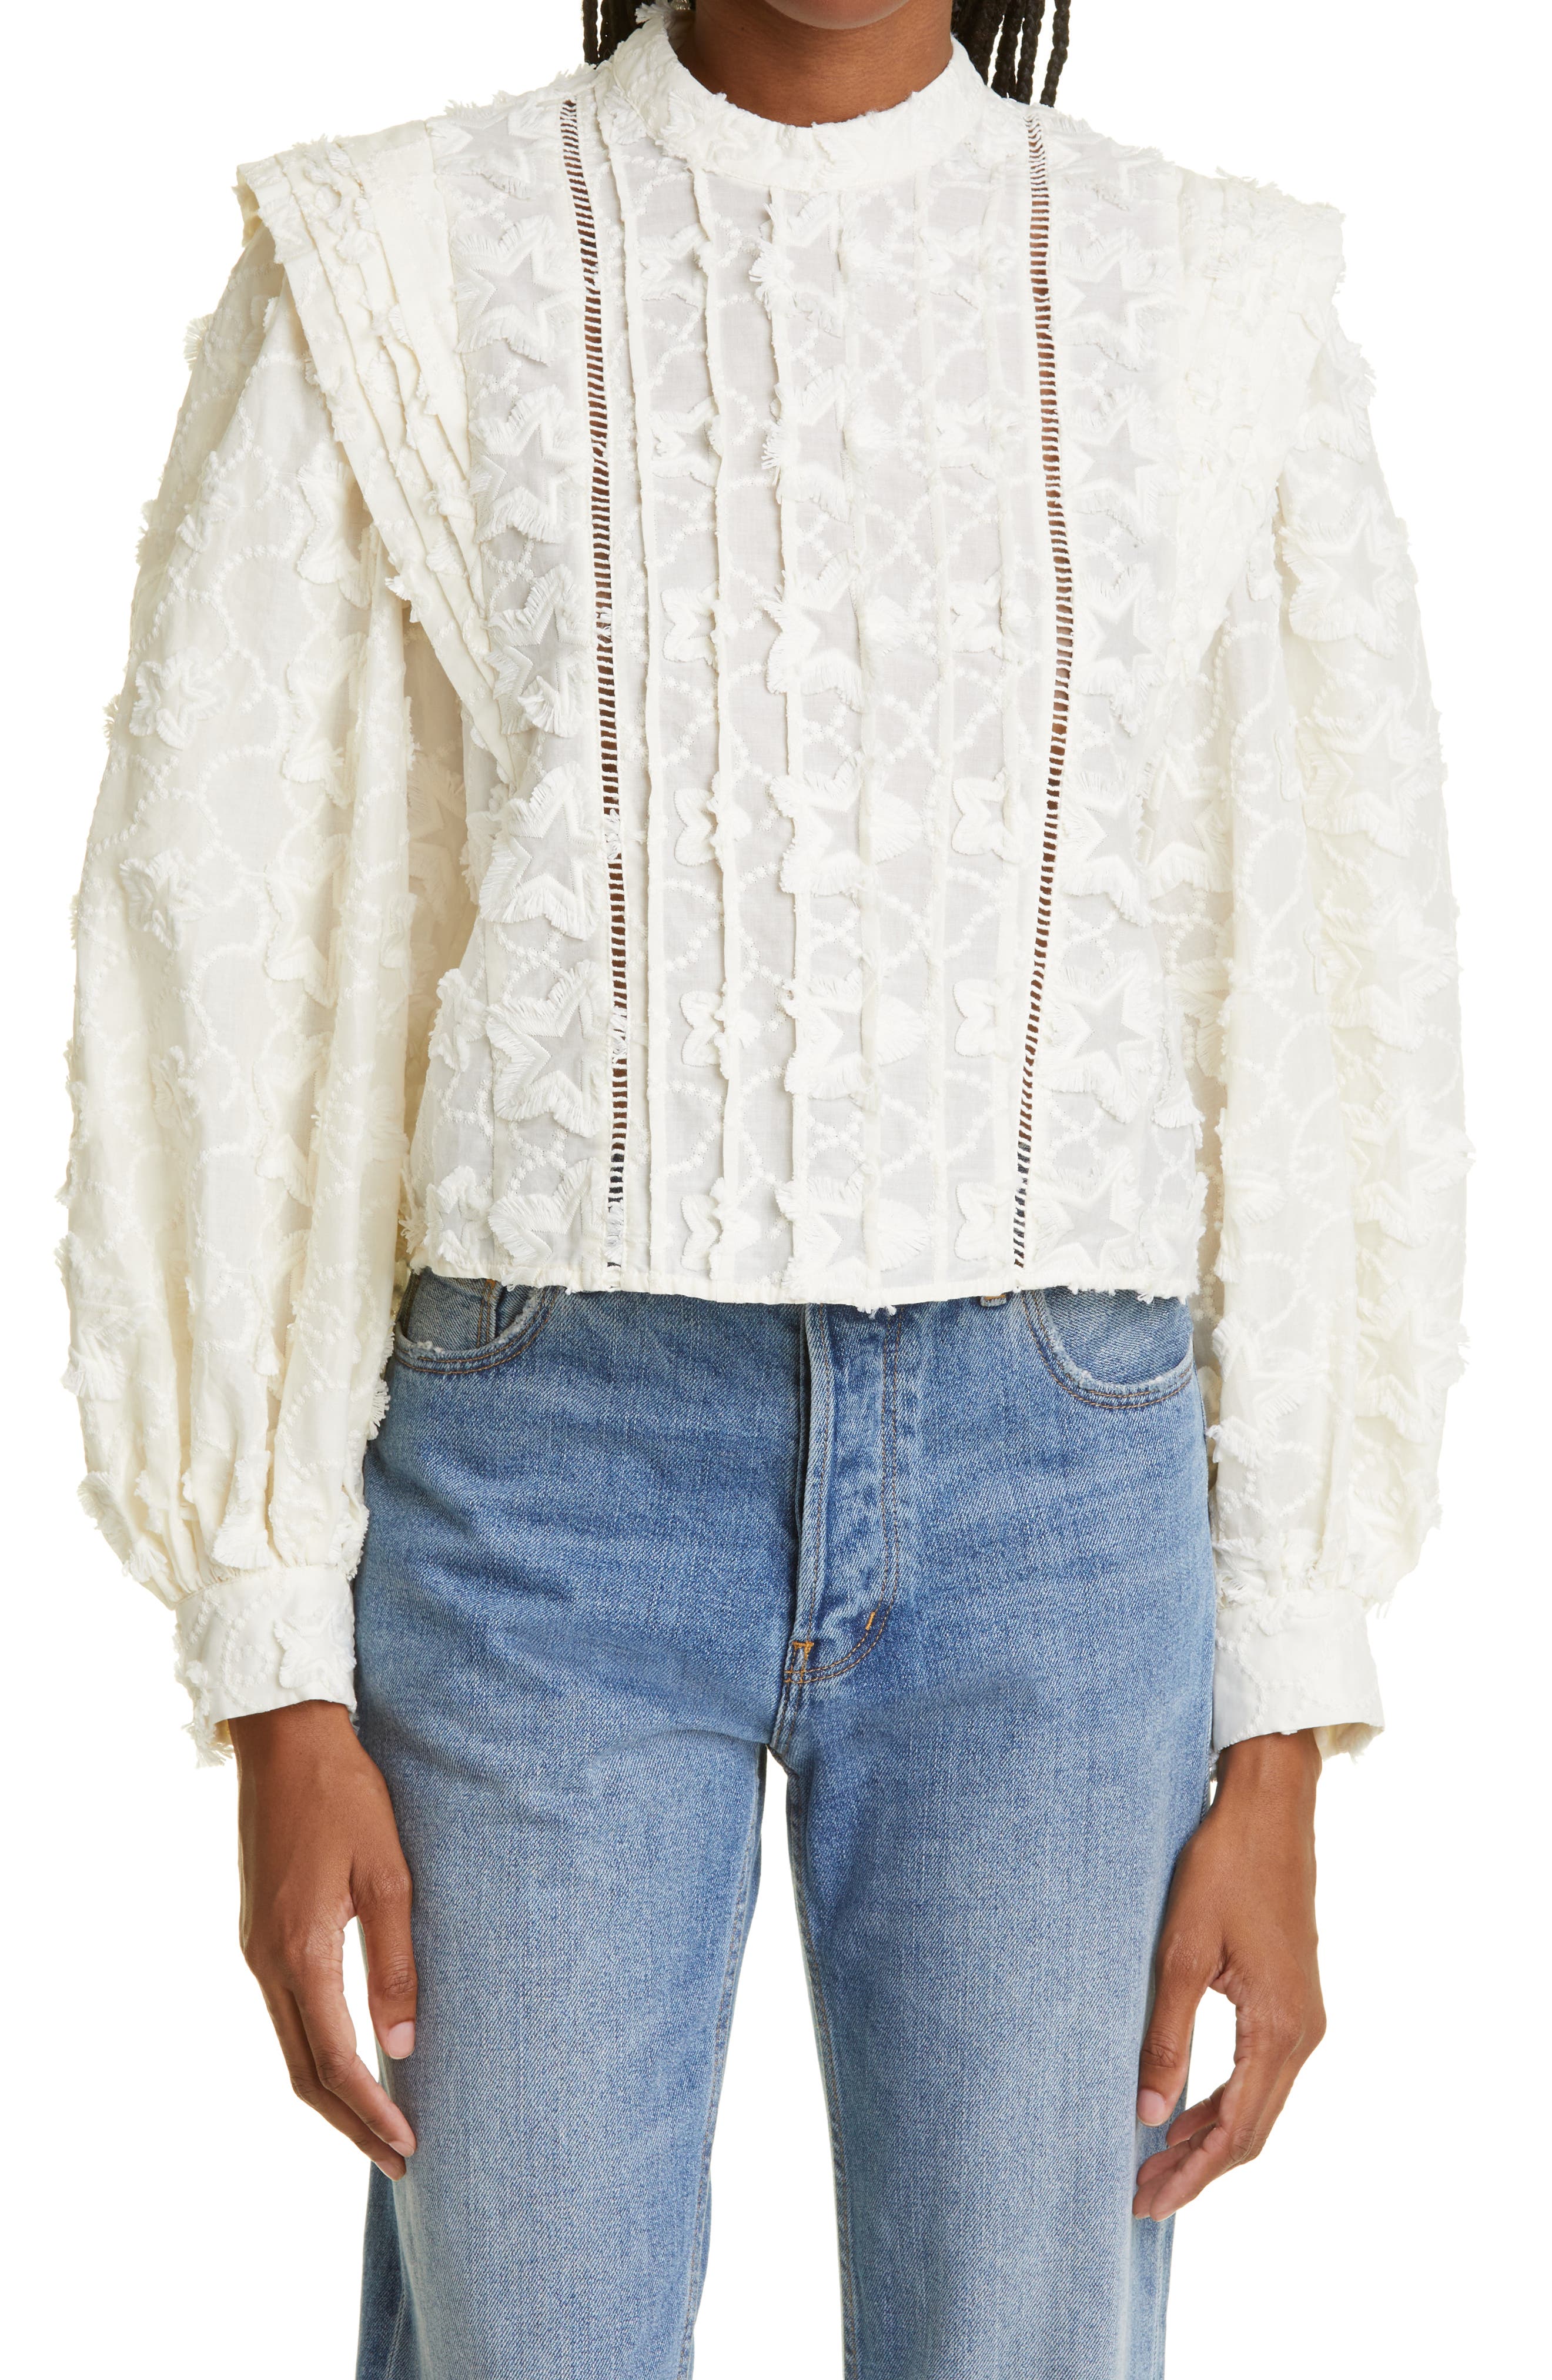 Sacai Embroidery Star Lace Blouse シャツ | red-village.com